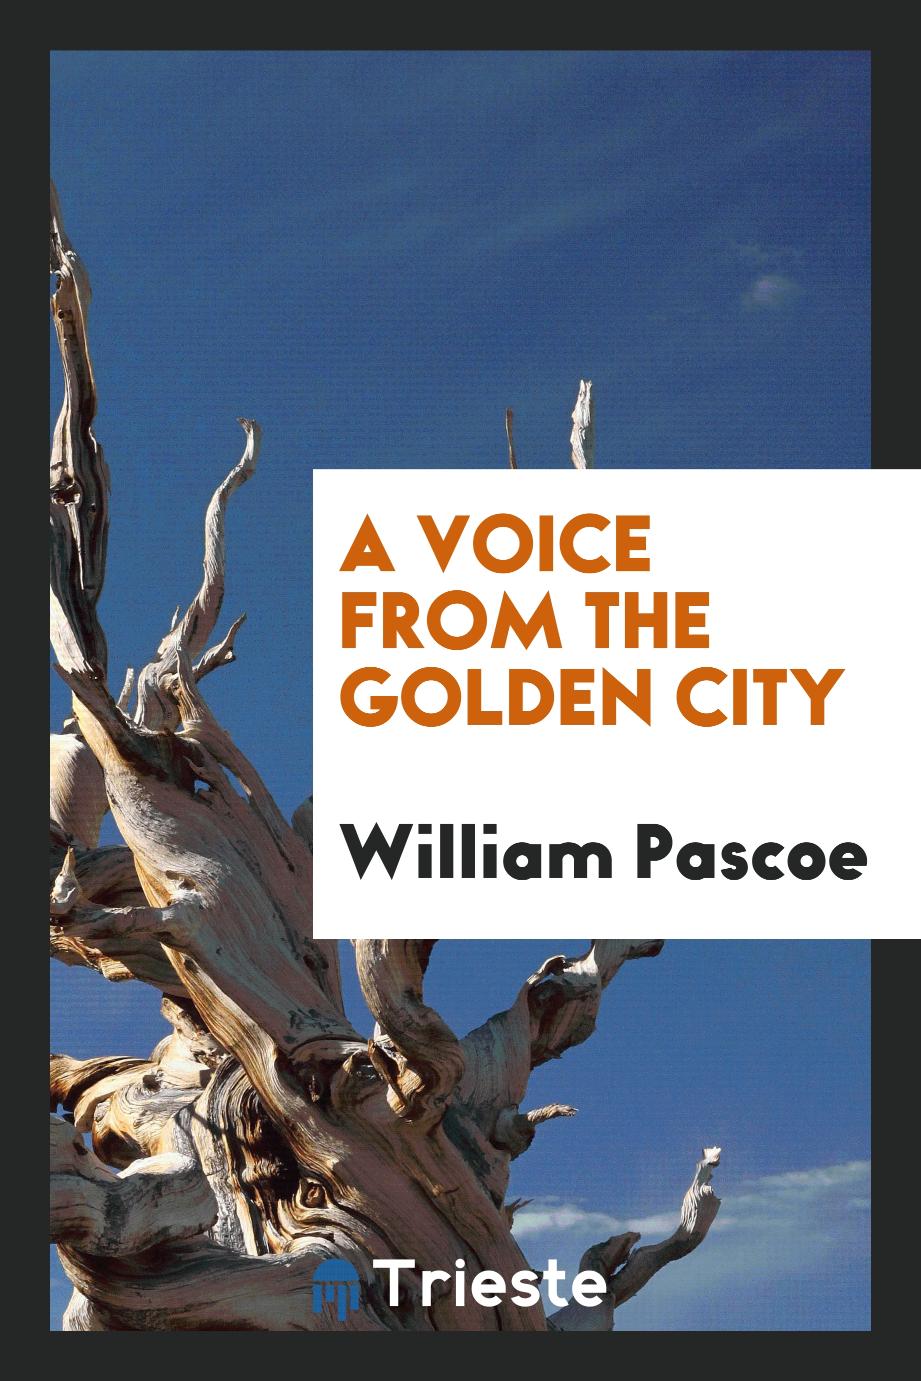 A Voice From the Golden City